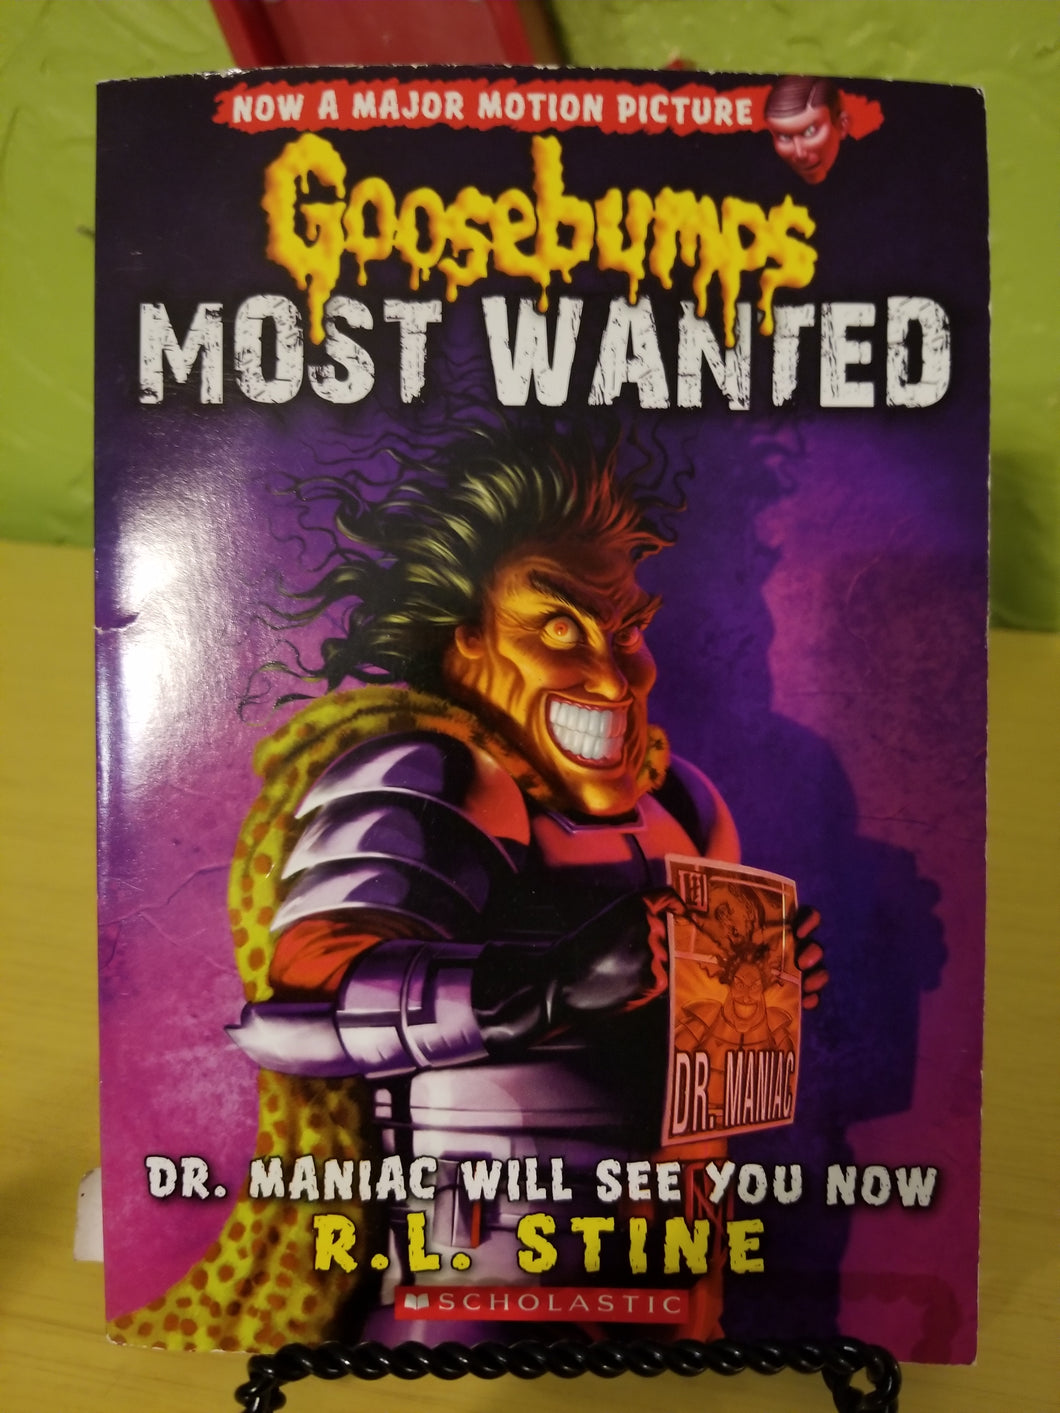 Goosebumps: Most Wanted #5 - Dr. Maniac Will See You Now